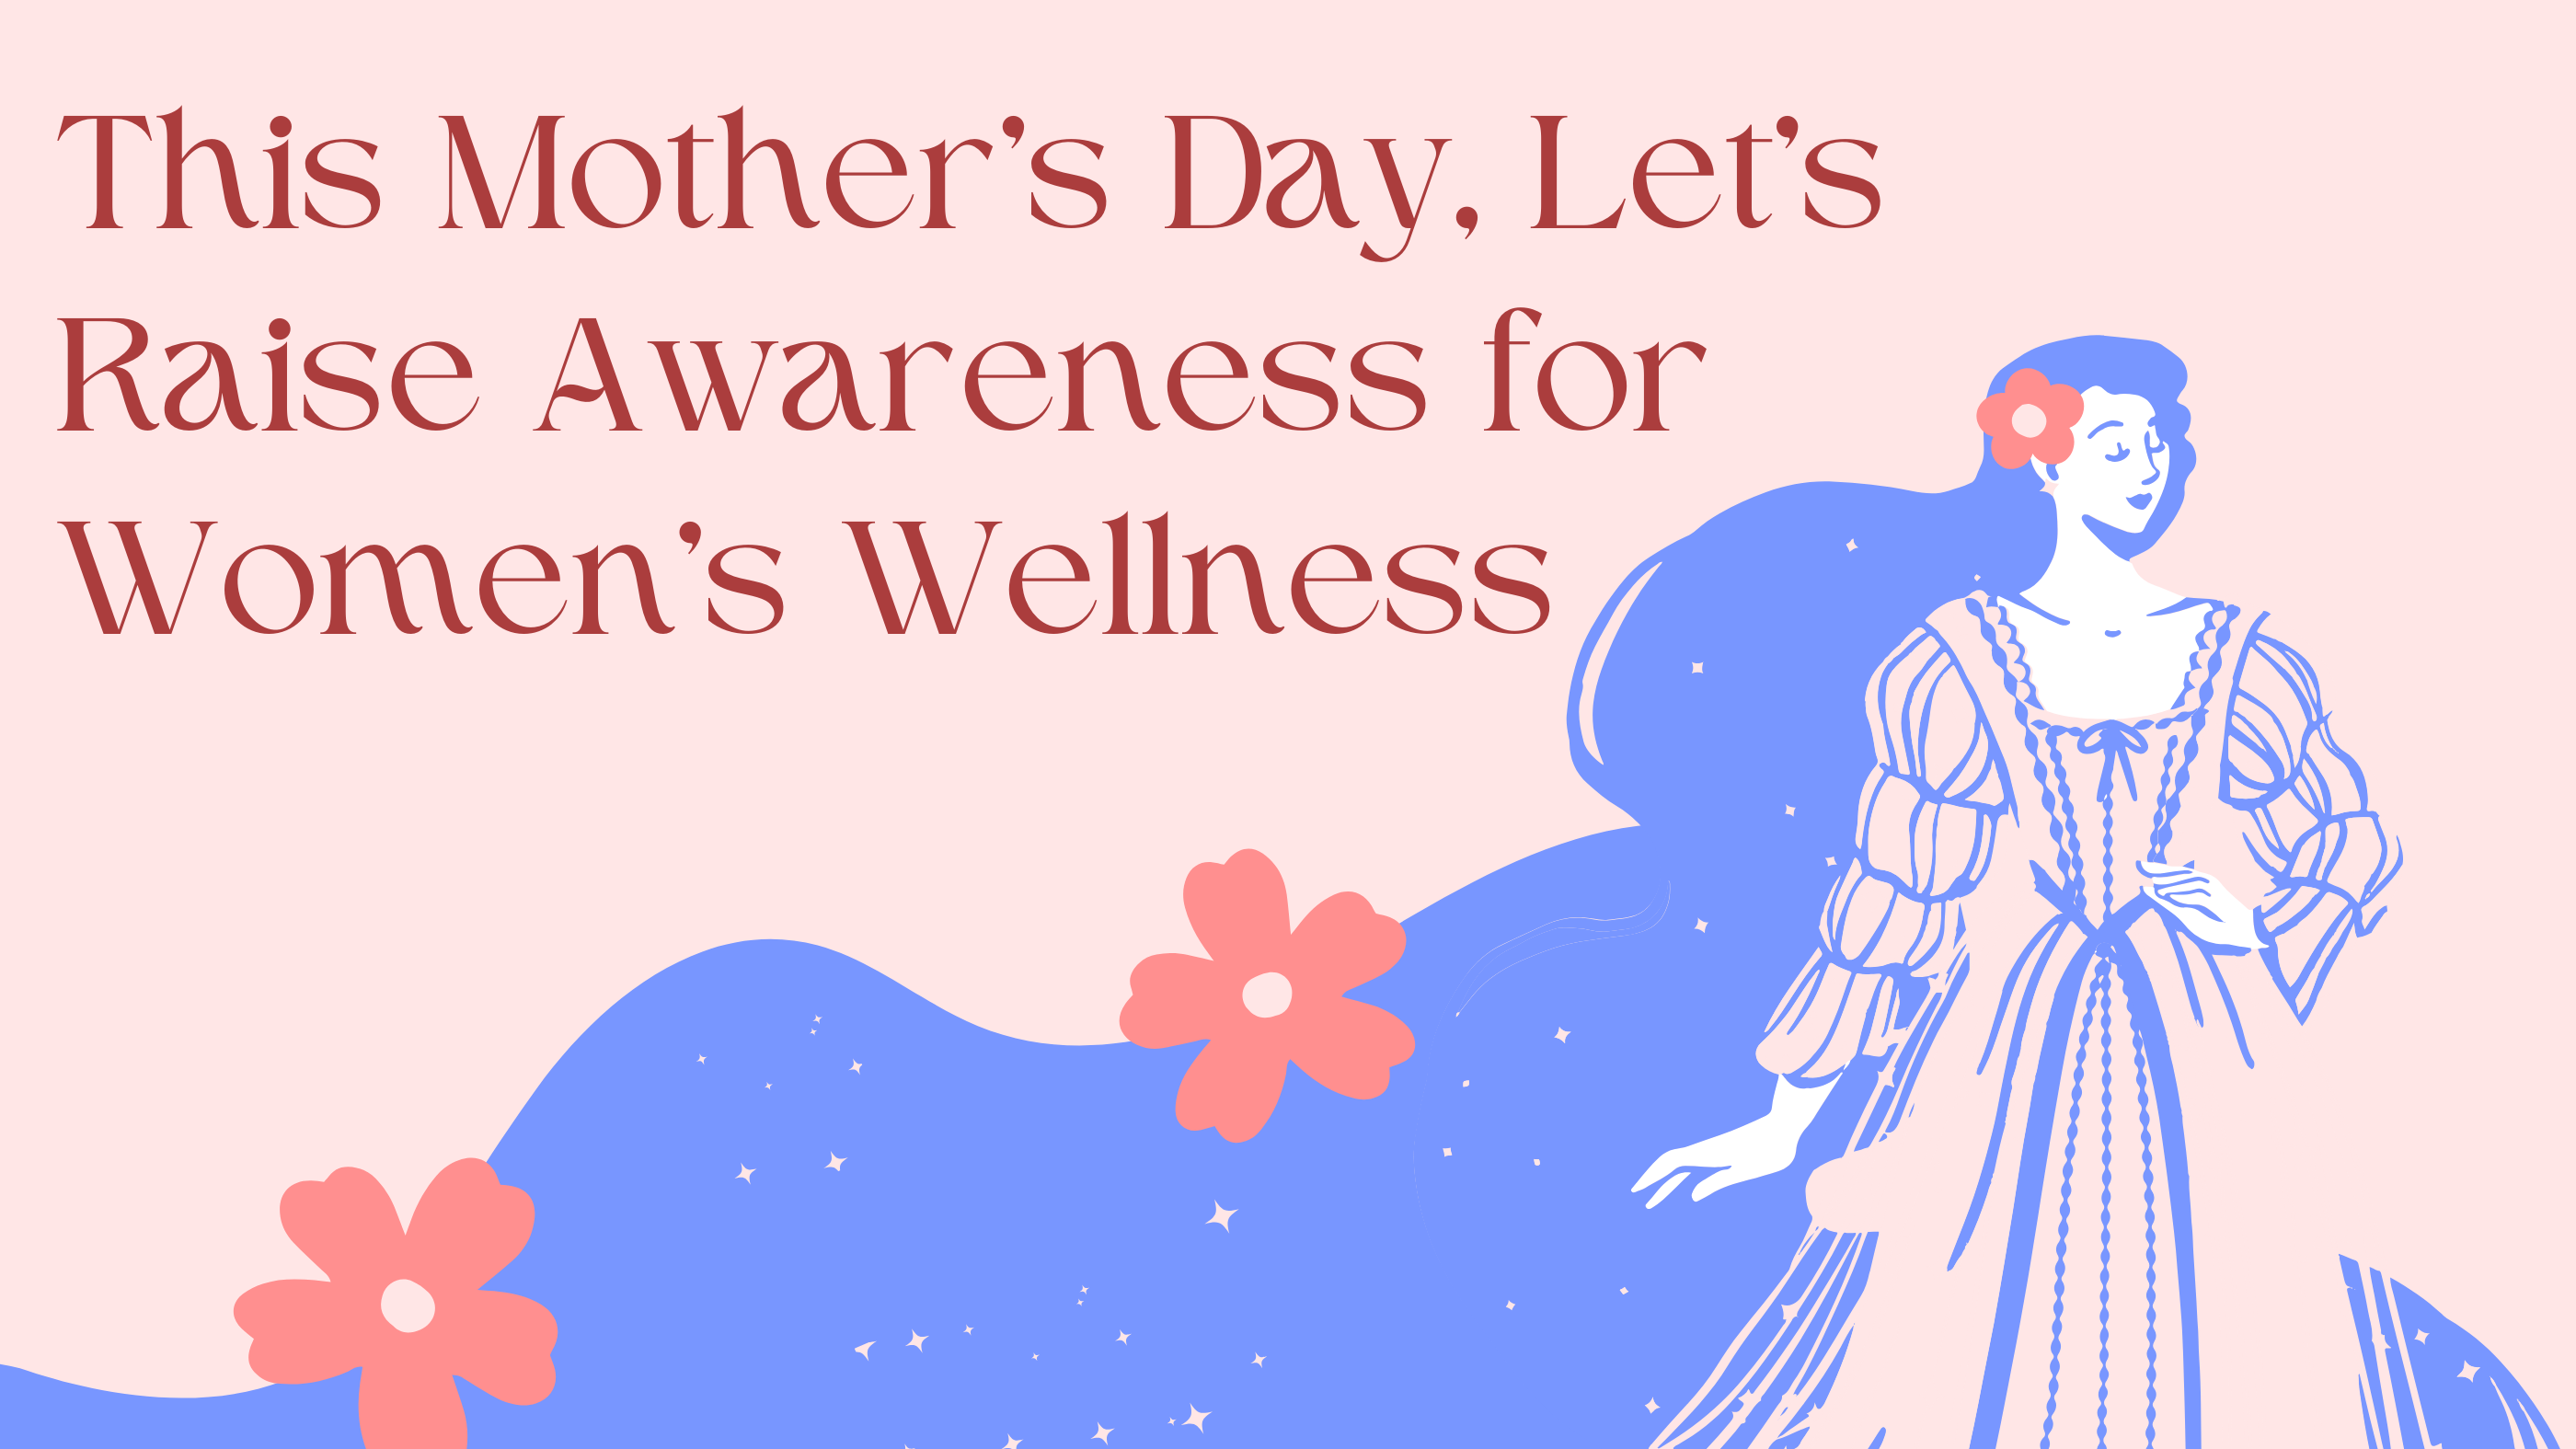 This Mother’s Day, Let’s Raise Awareness for Women’s Wellness